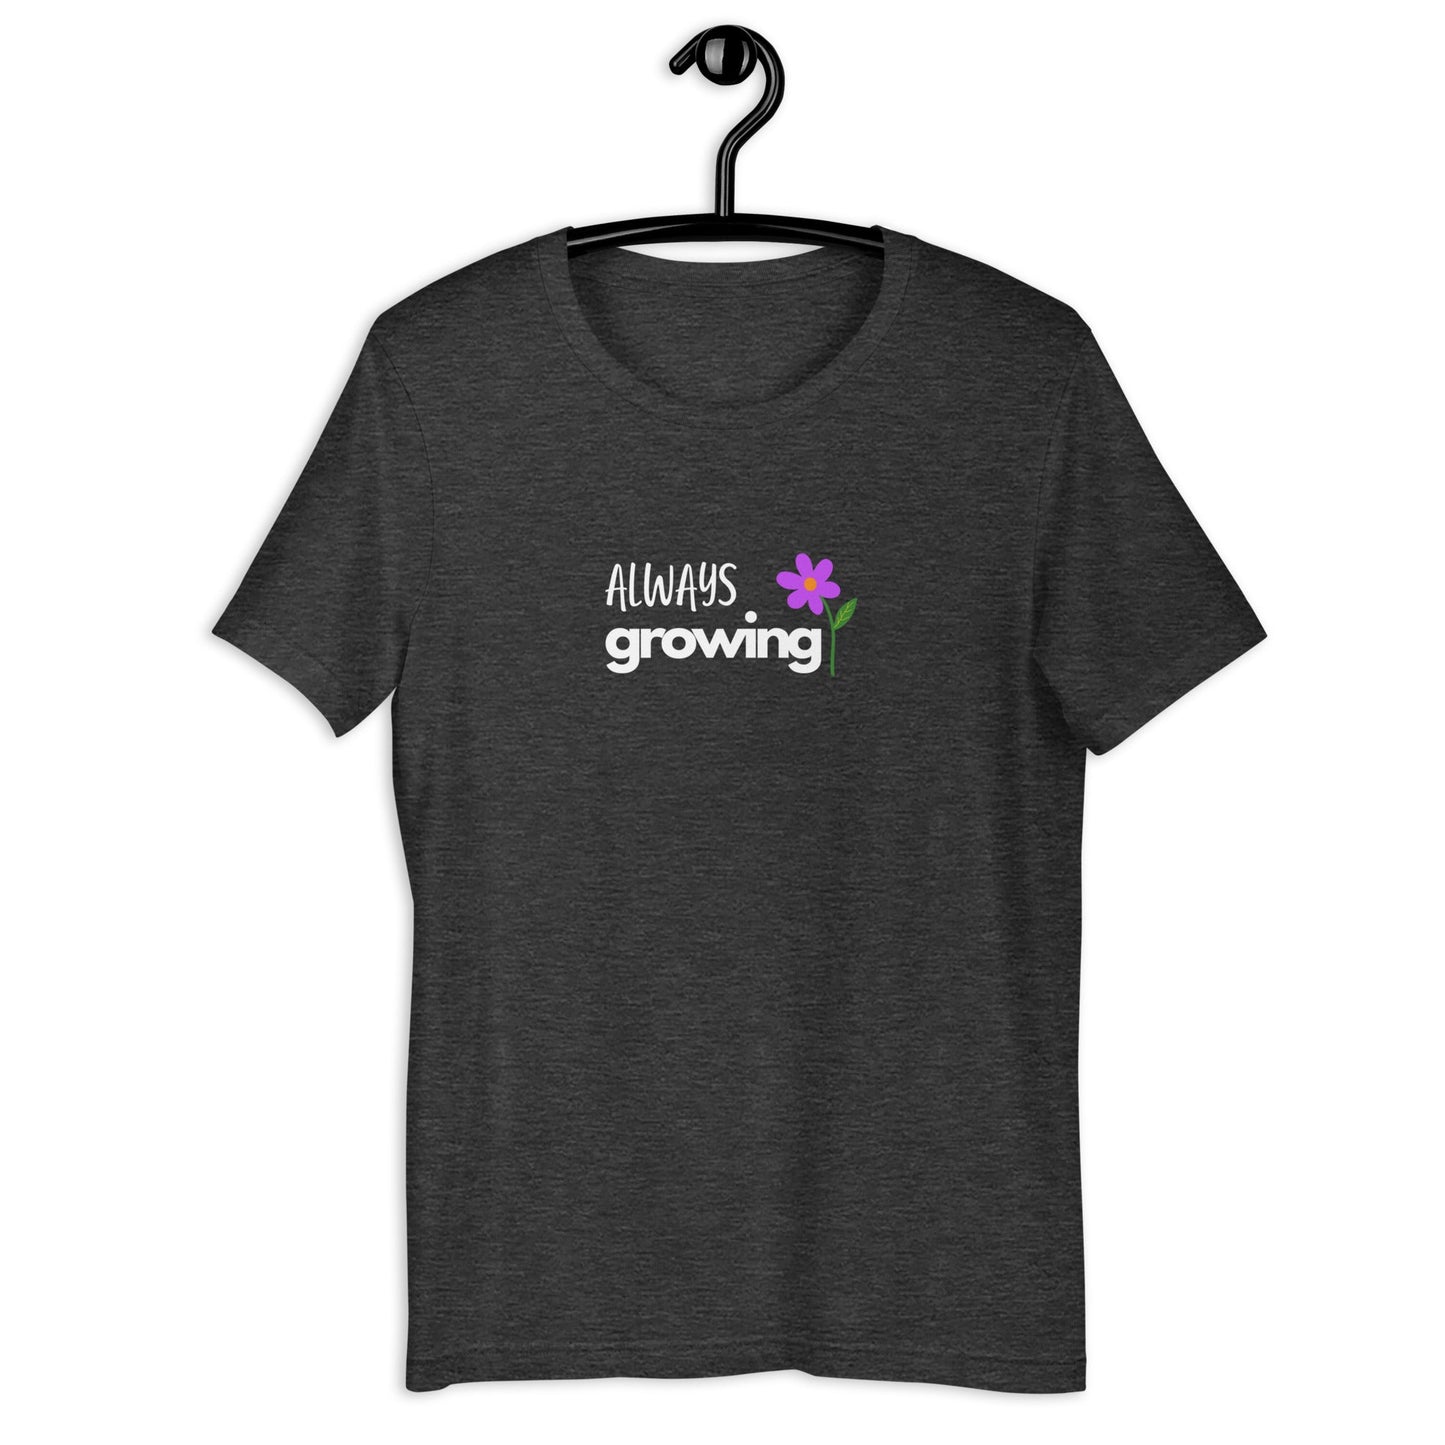 Always Growing - Soft Bella + Canvas Graphic T-shirt